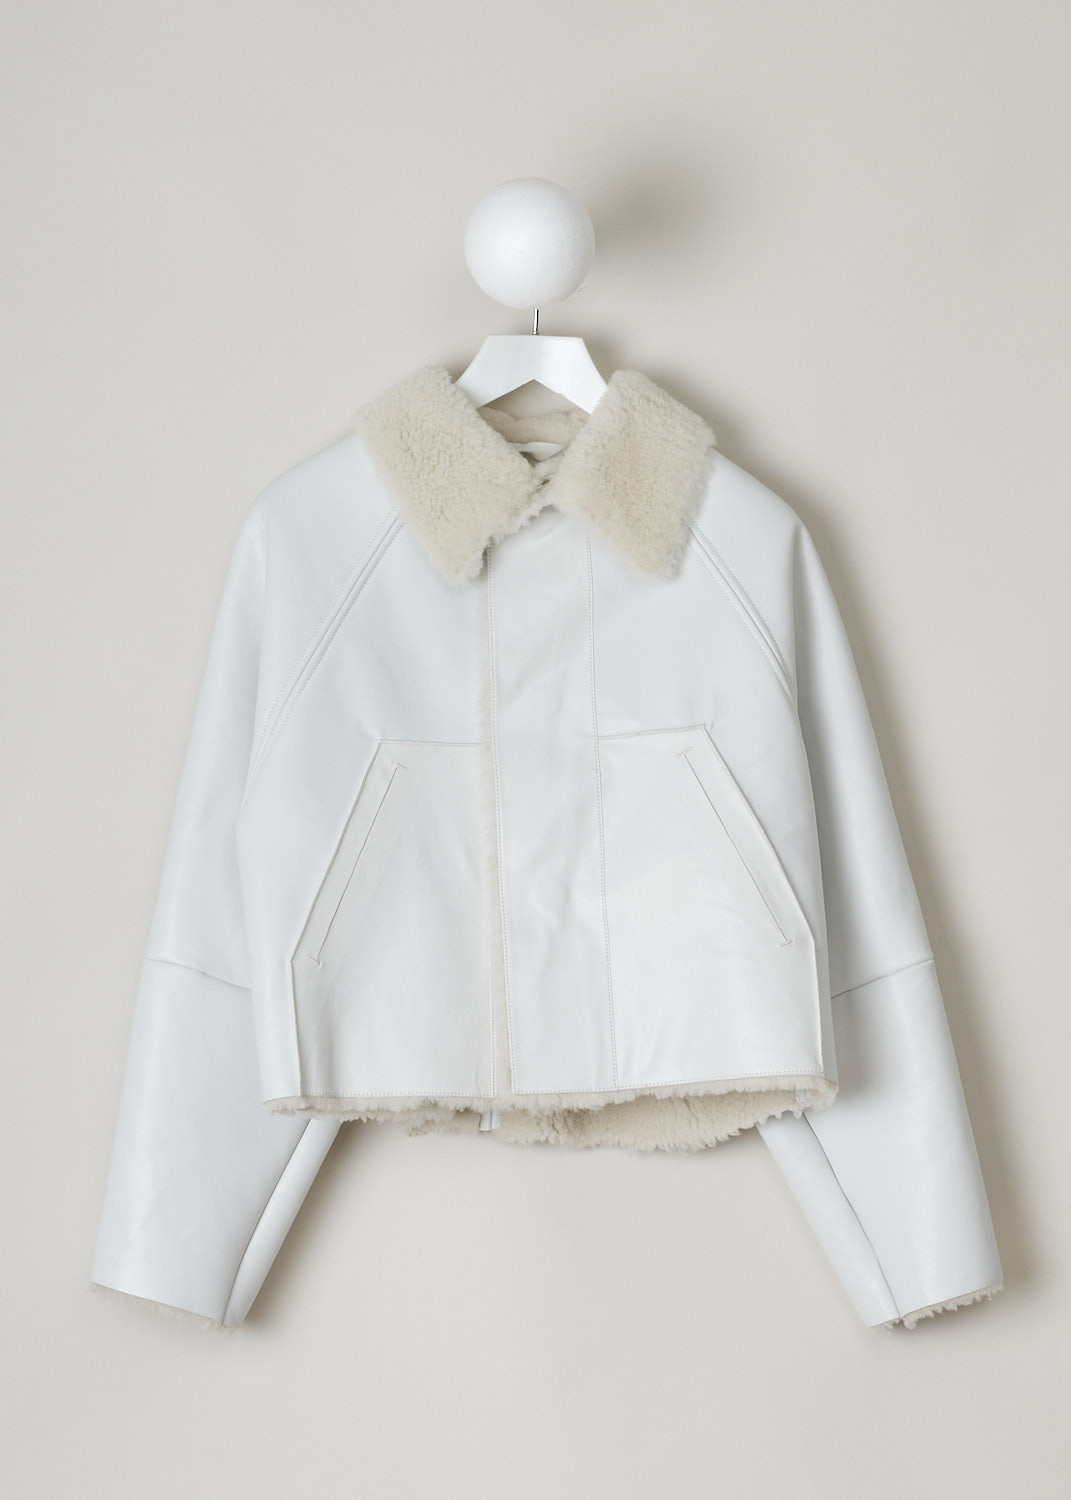 KASSL, CROPPED SHEARLING OIL WHITE COAT, C11310000W_COAT_ORIGINAL_CROPPED_SHEARLING_OIL_WHITE, White, Front, This cropped coat is made with the brand's signature oil coated cotton-blend in white and is fully lined with shearling. The coat has a shearling spread collar, magnetic front button closure and slanted pockets. The coat is constructed with different seams, giving it a paneled look. 
